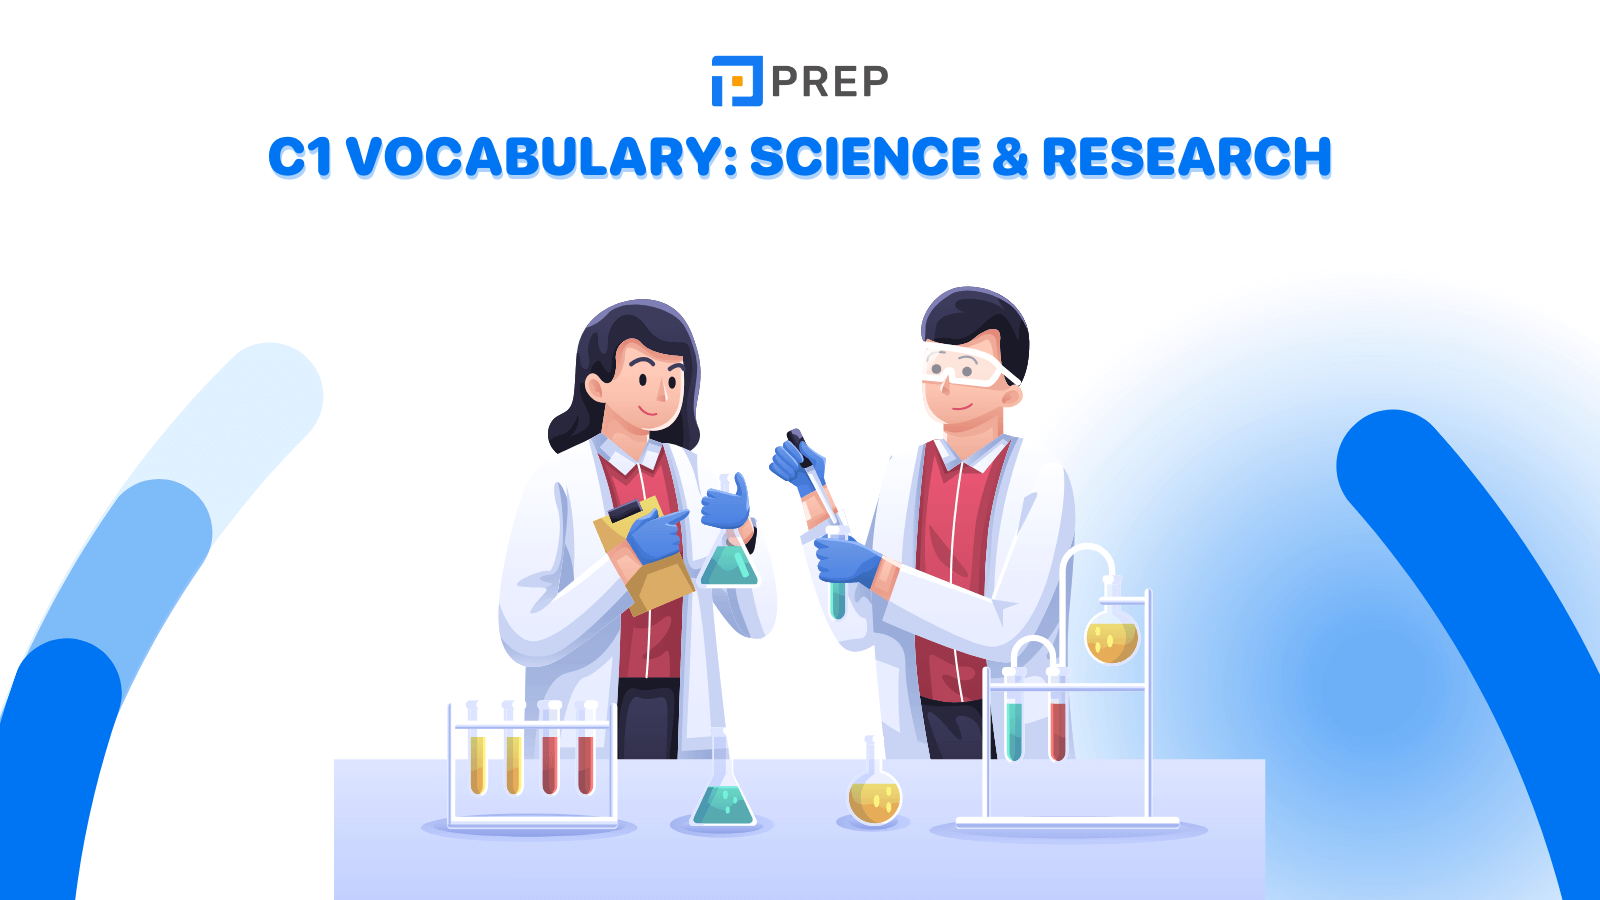 C1 vocabulary: Science & Research